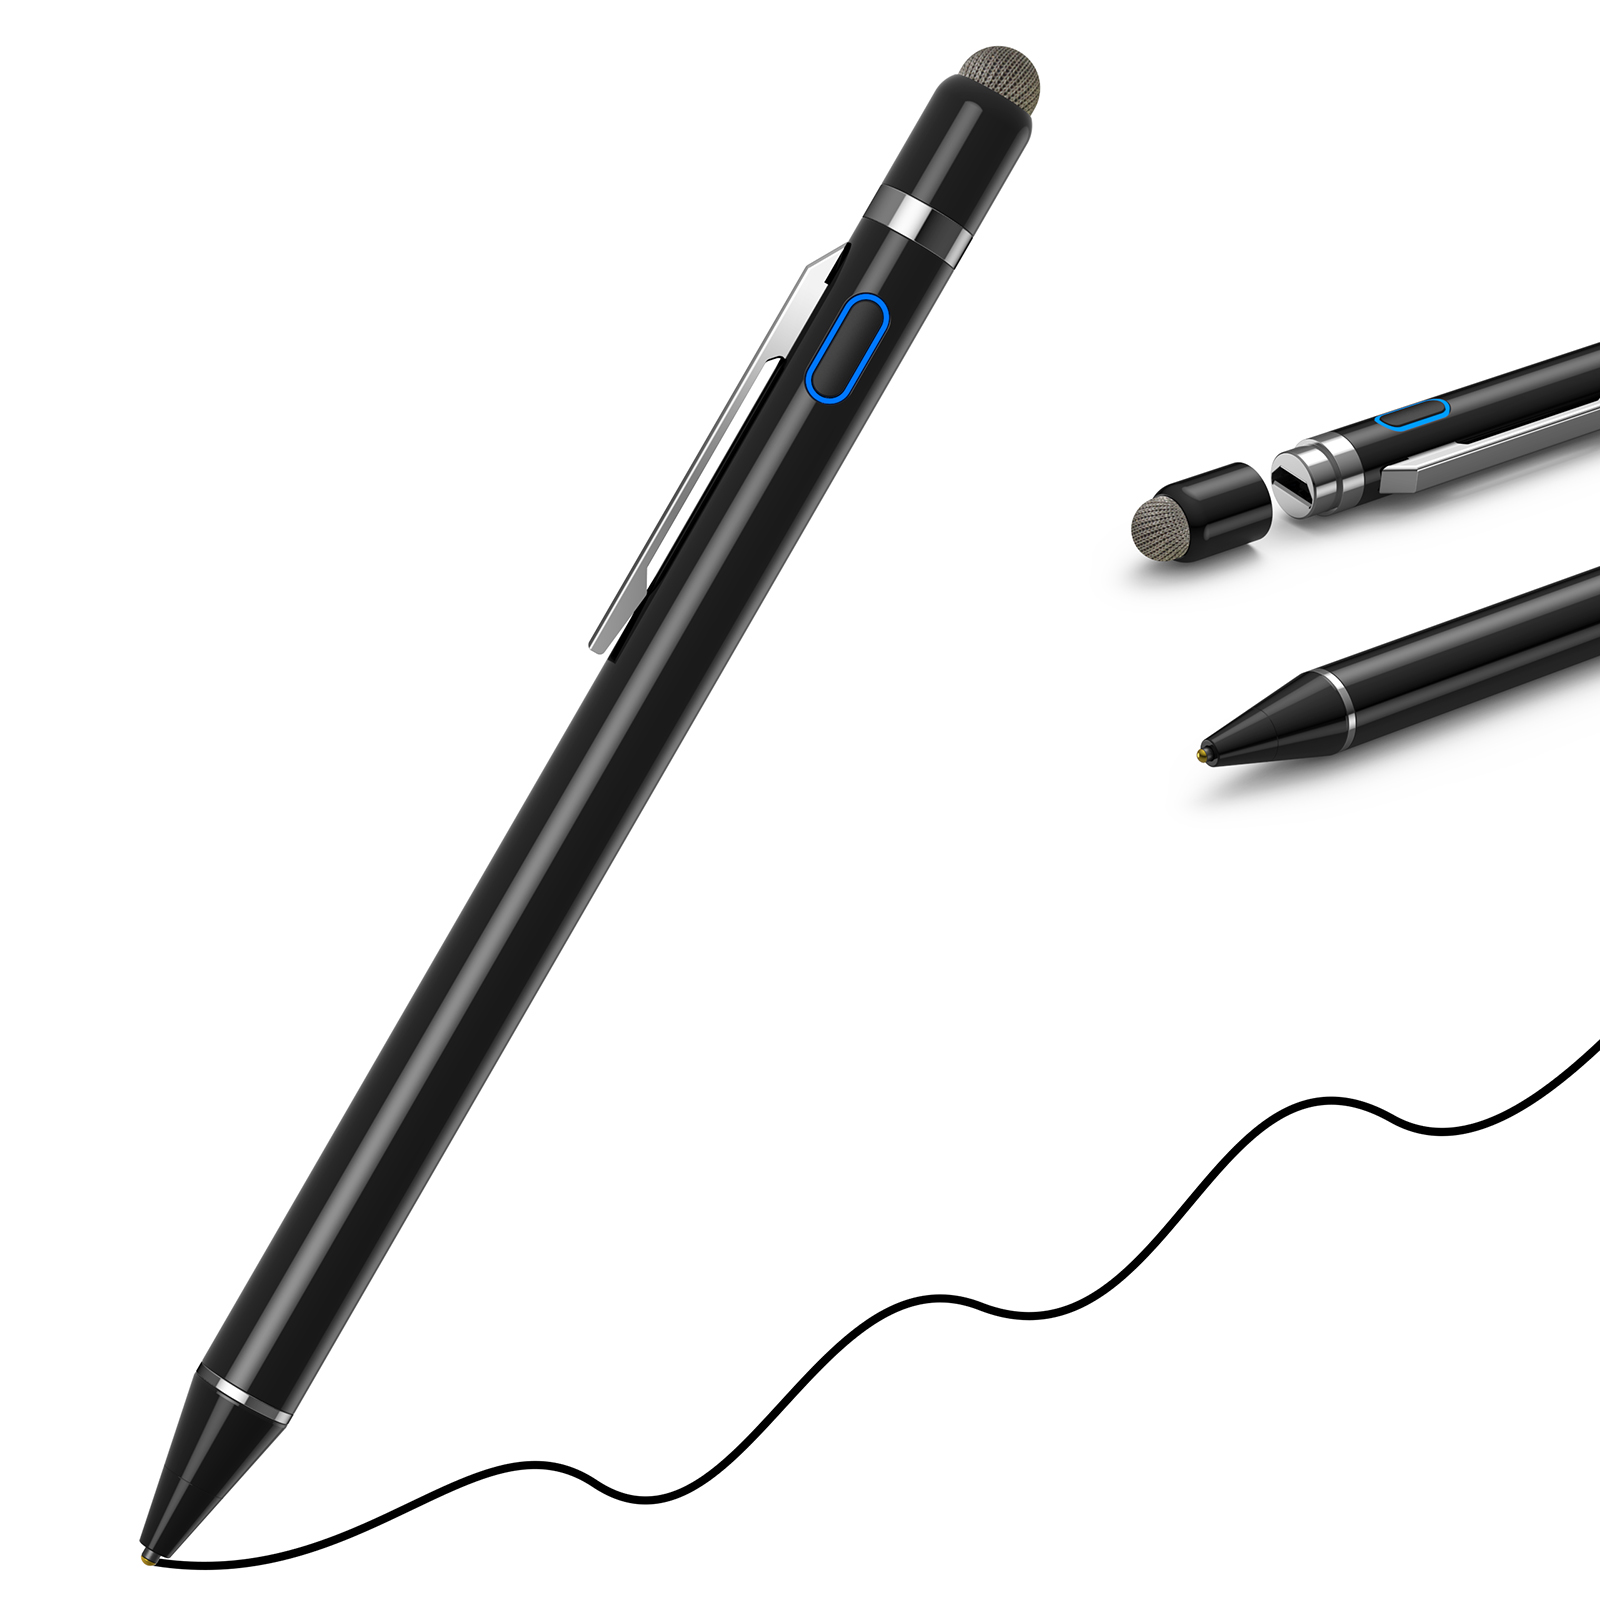 Big Discount Ipad Pencil Stylus - K825 2in1 Stylus Pen, can be used without charging – Centyoo